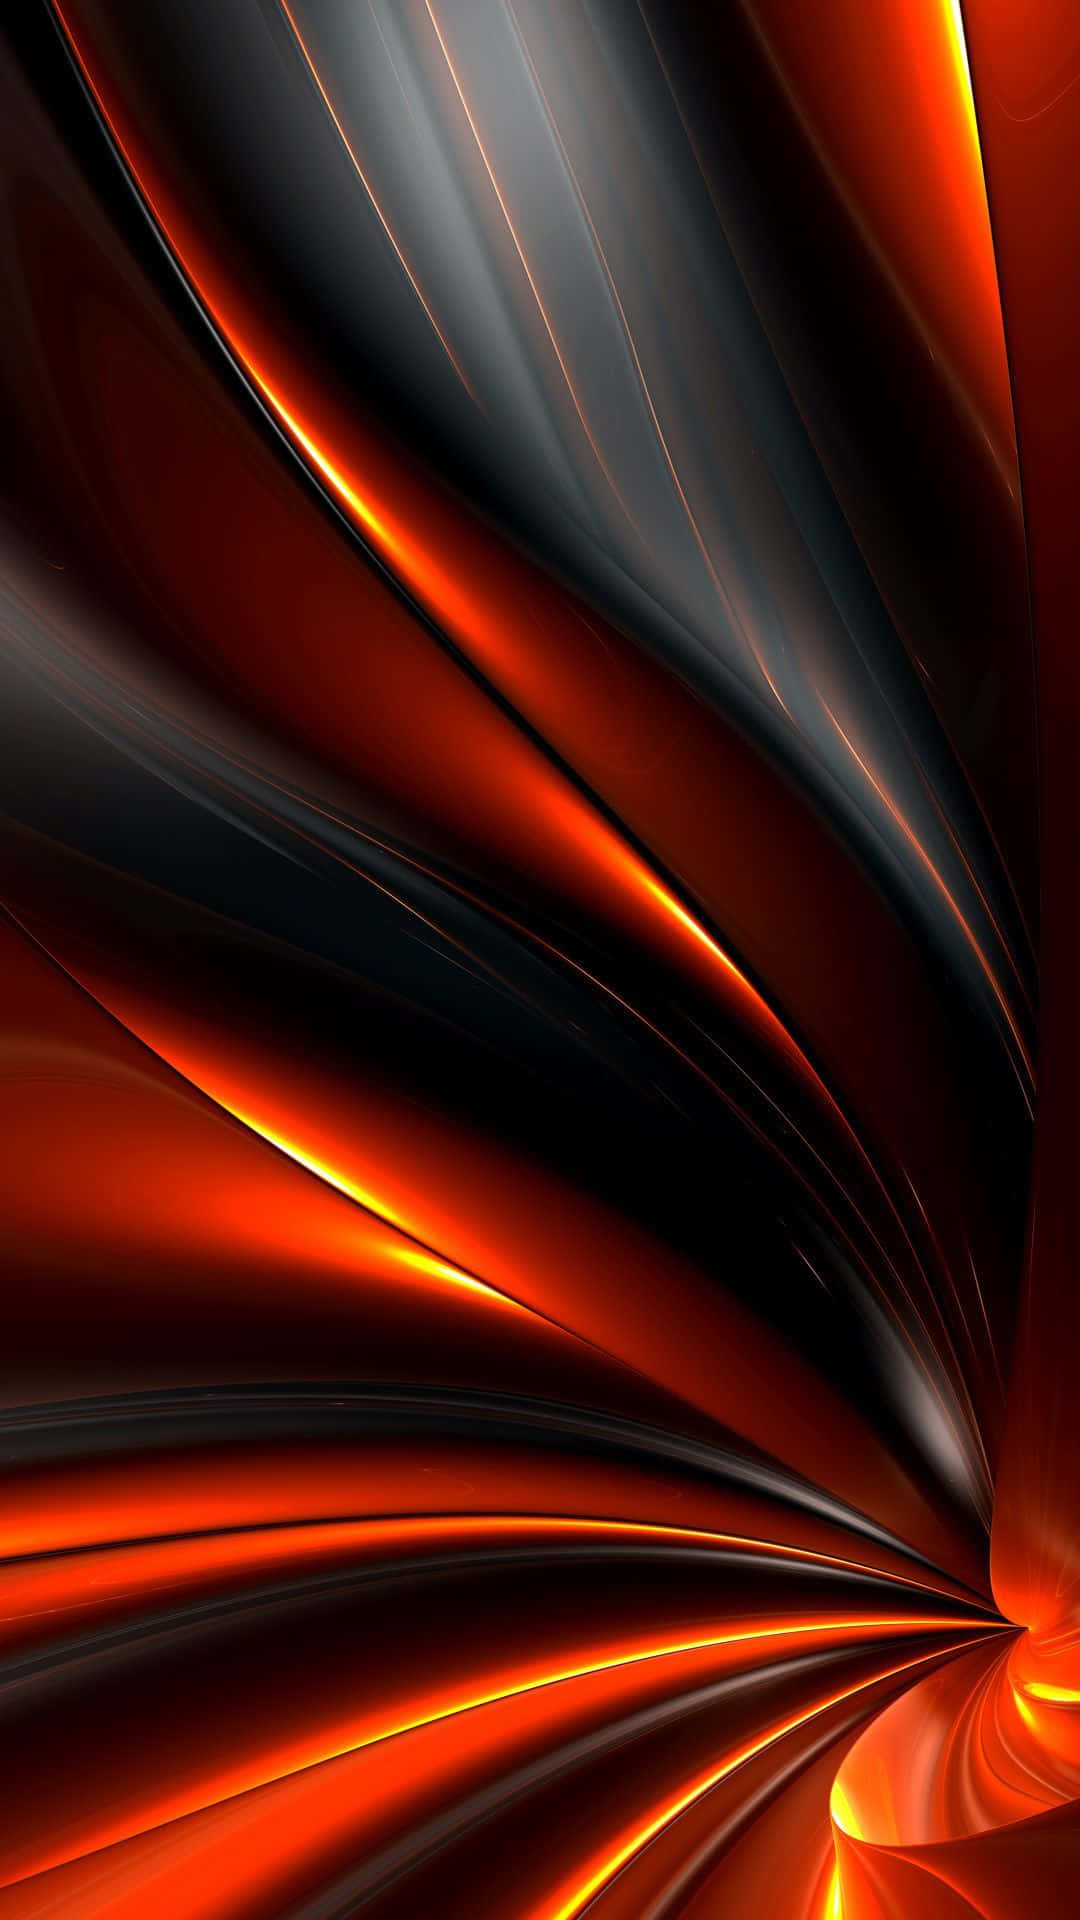 An Abstract Orange And Black Background Wallpaper